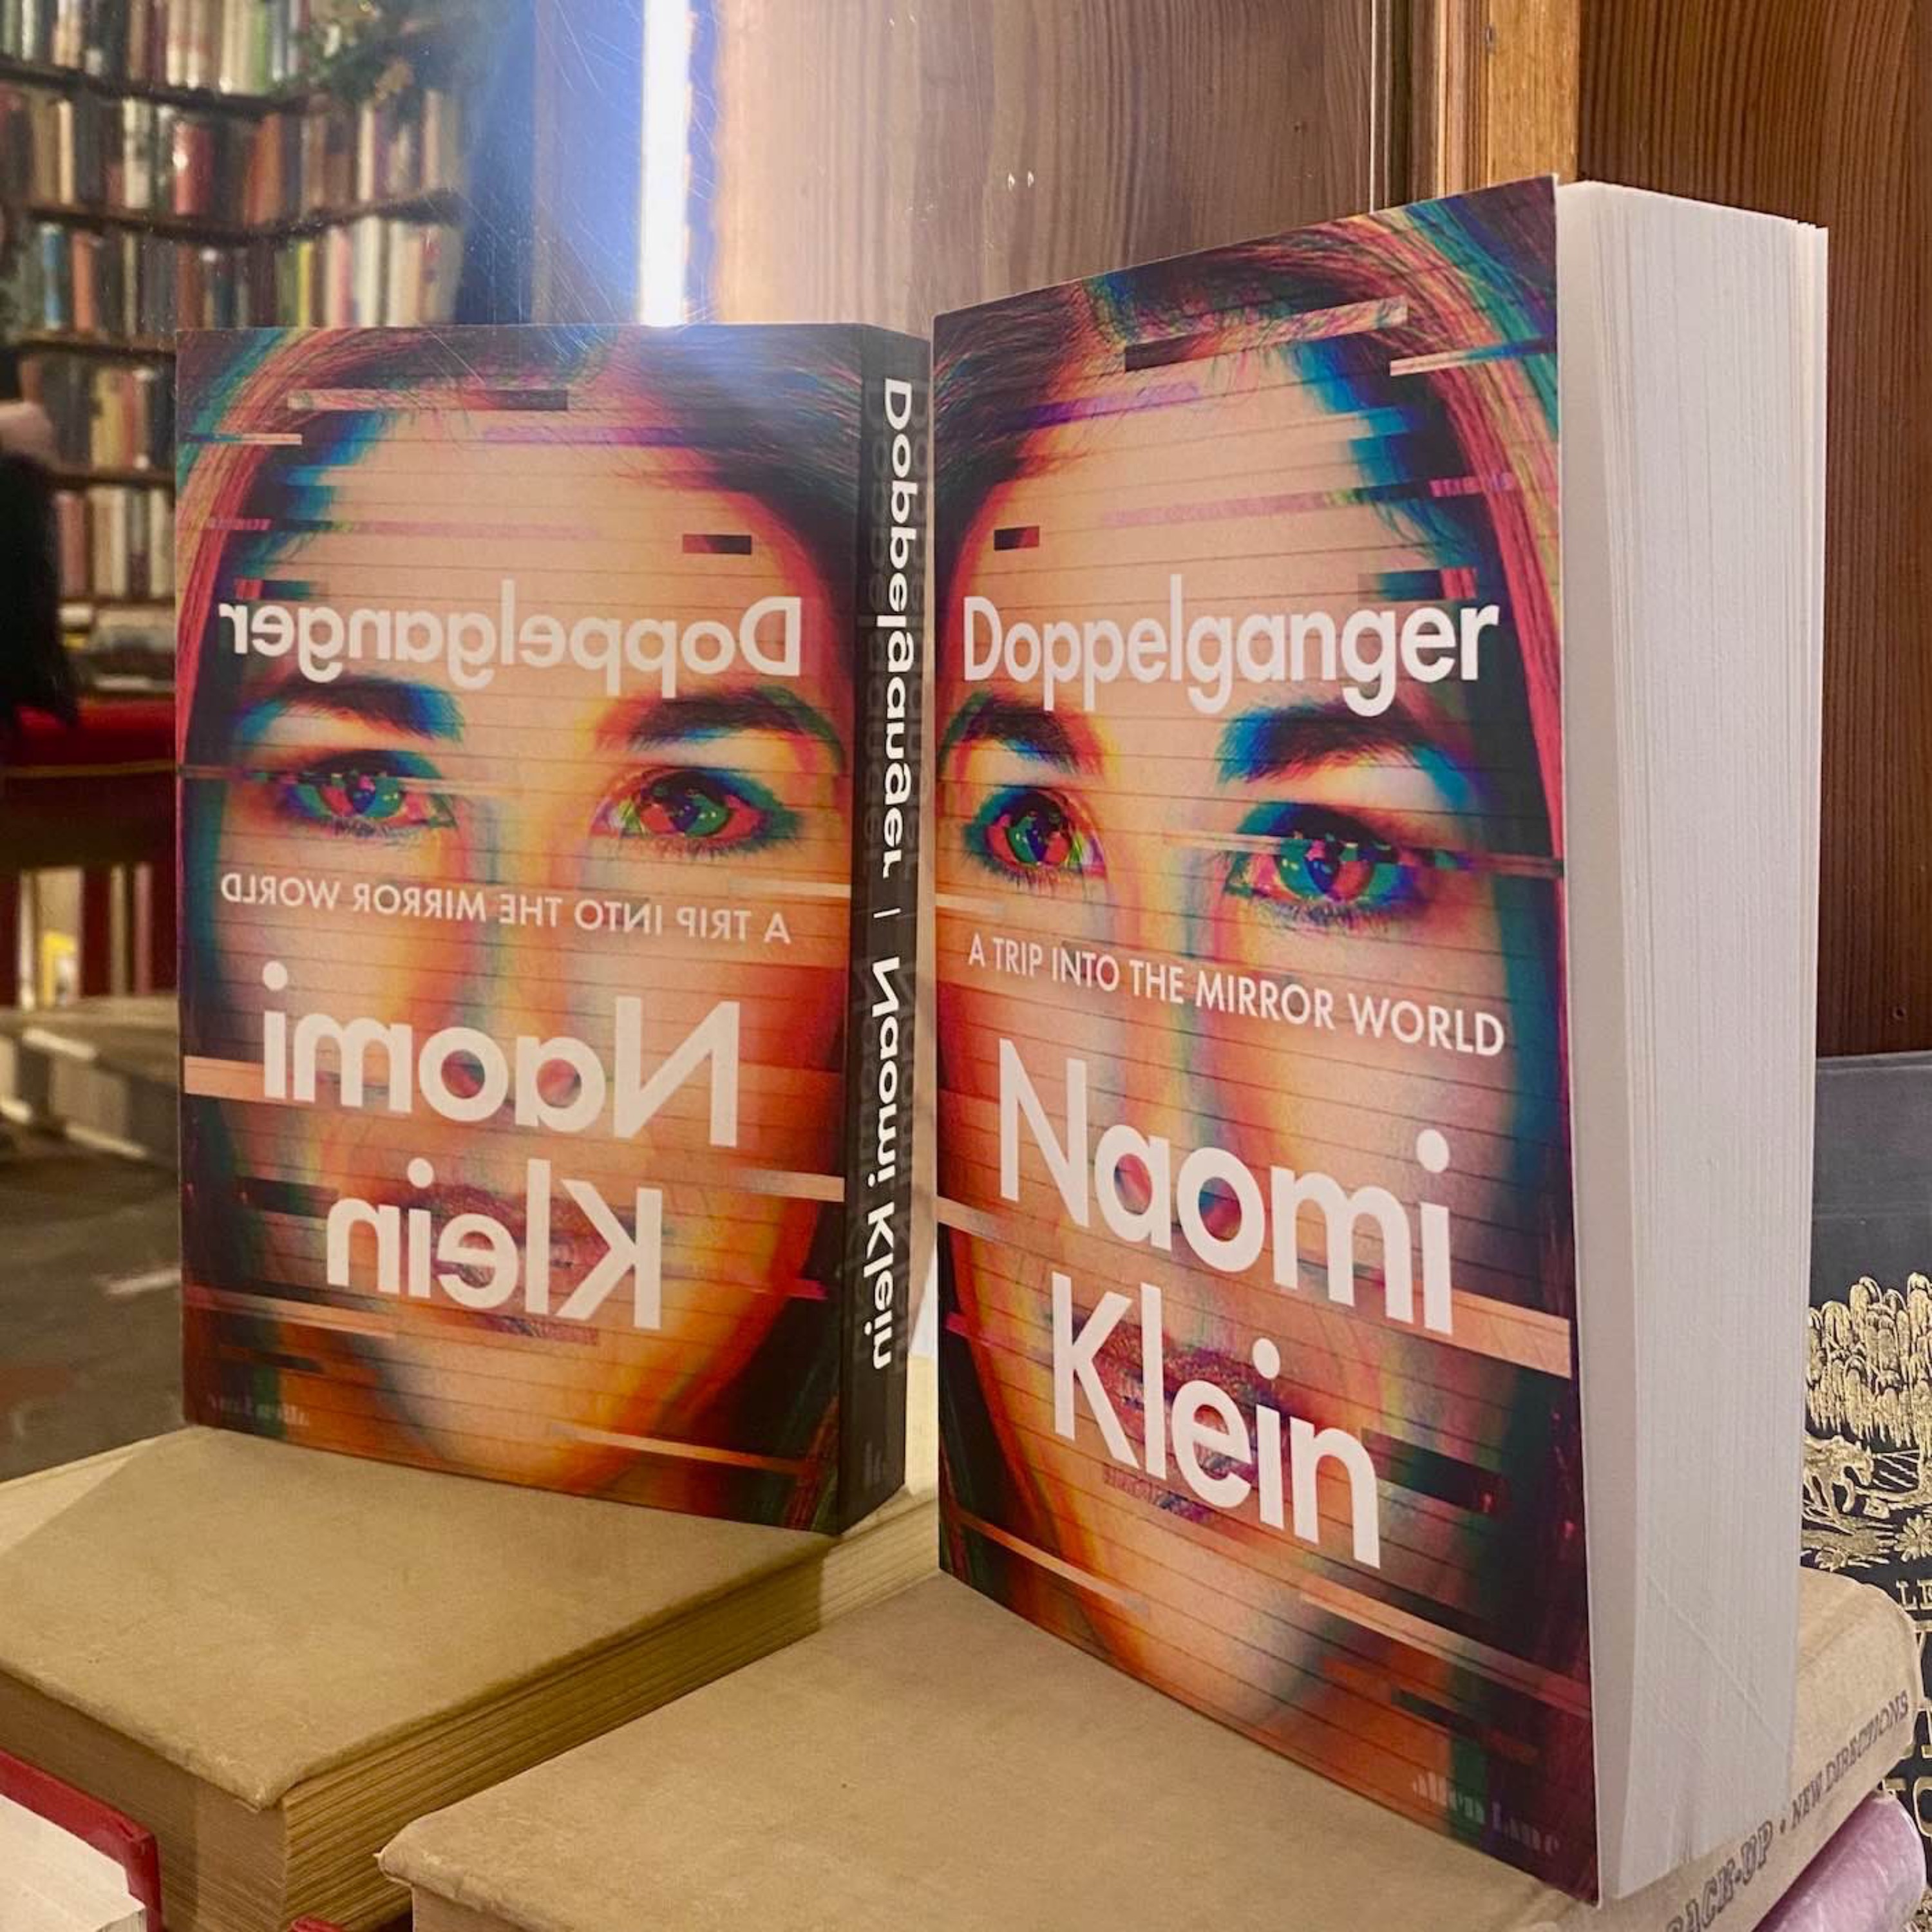 👭🏼Naomi Klein on Doppelgangers, Conspiracy Theories, and the Shadowlands we all inhabit…👭🏼